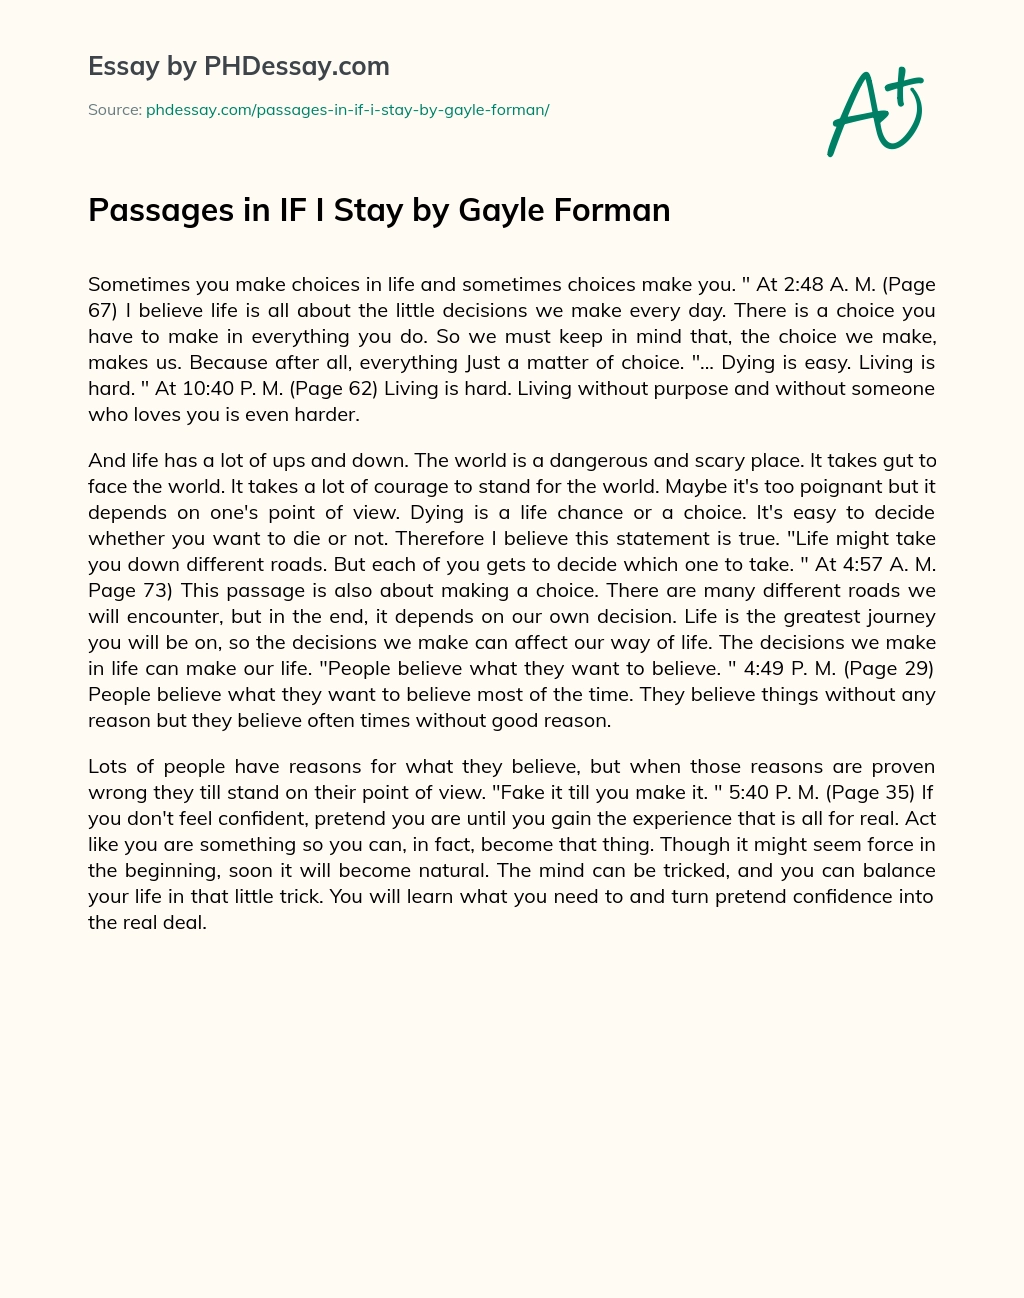 if i stay book review essay